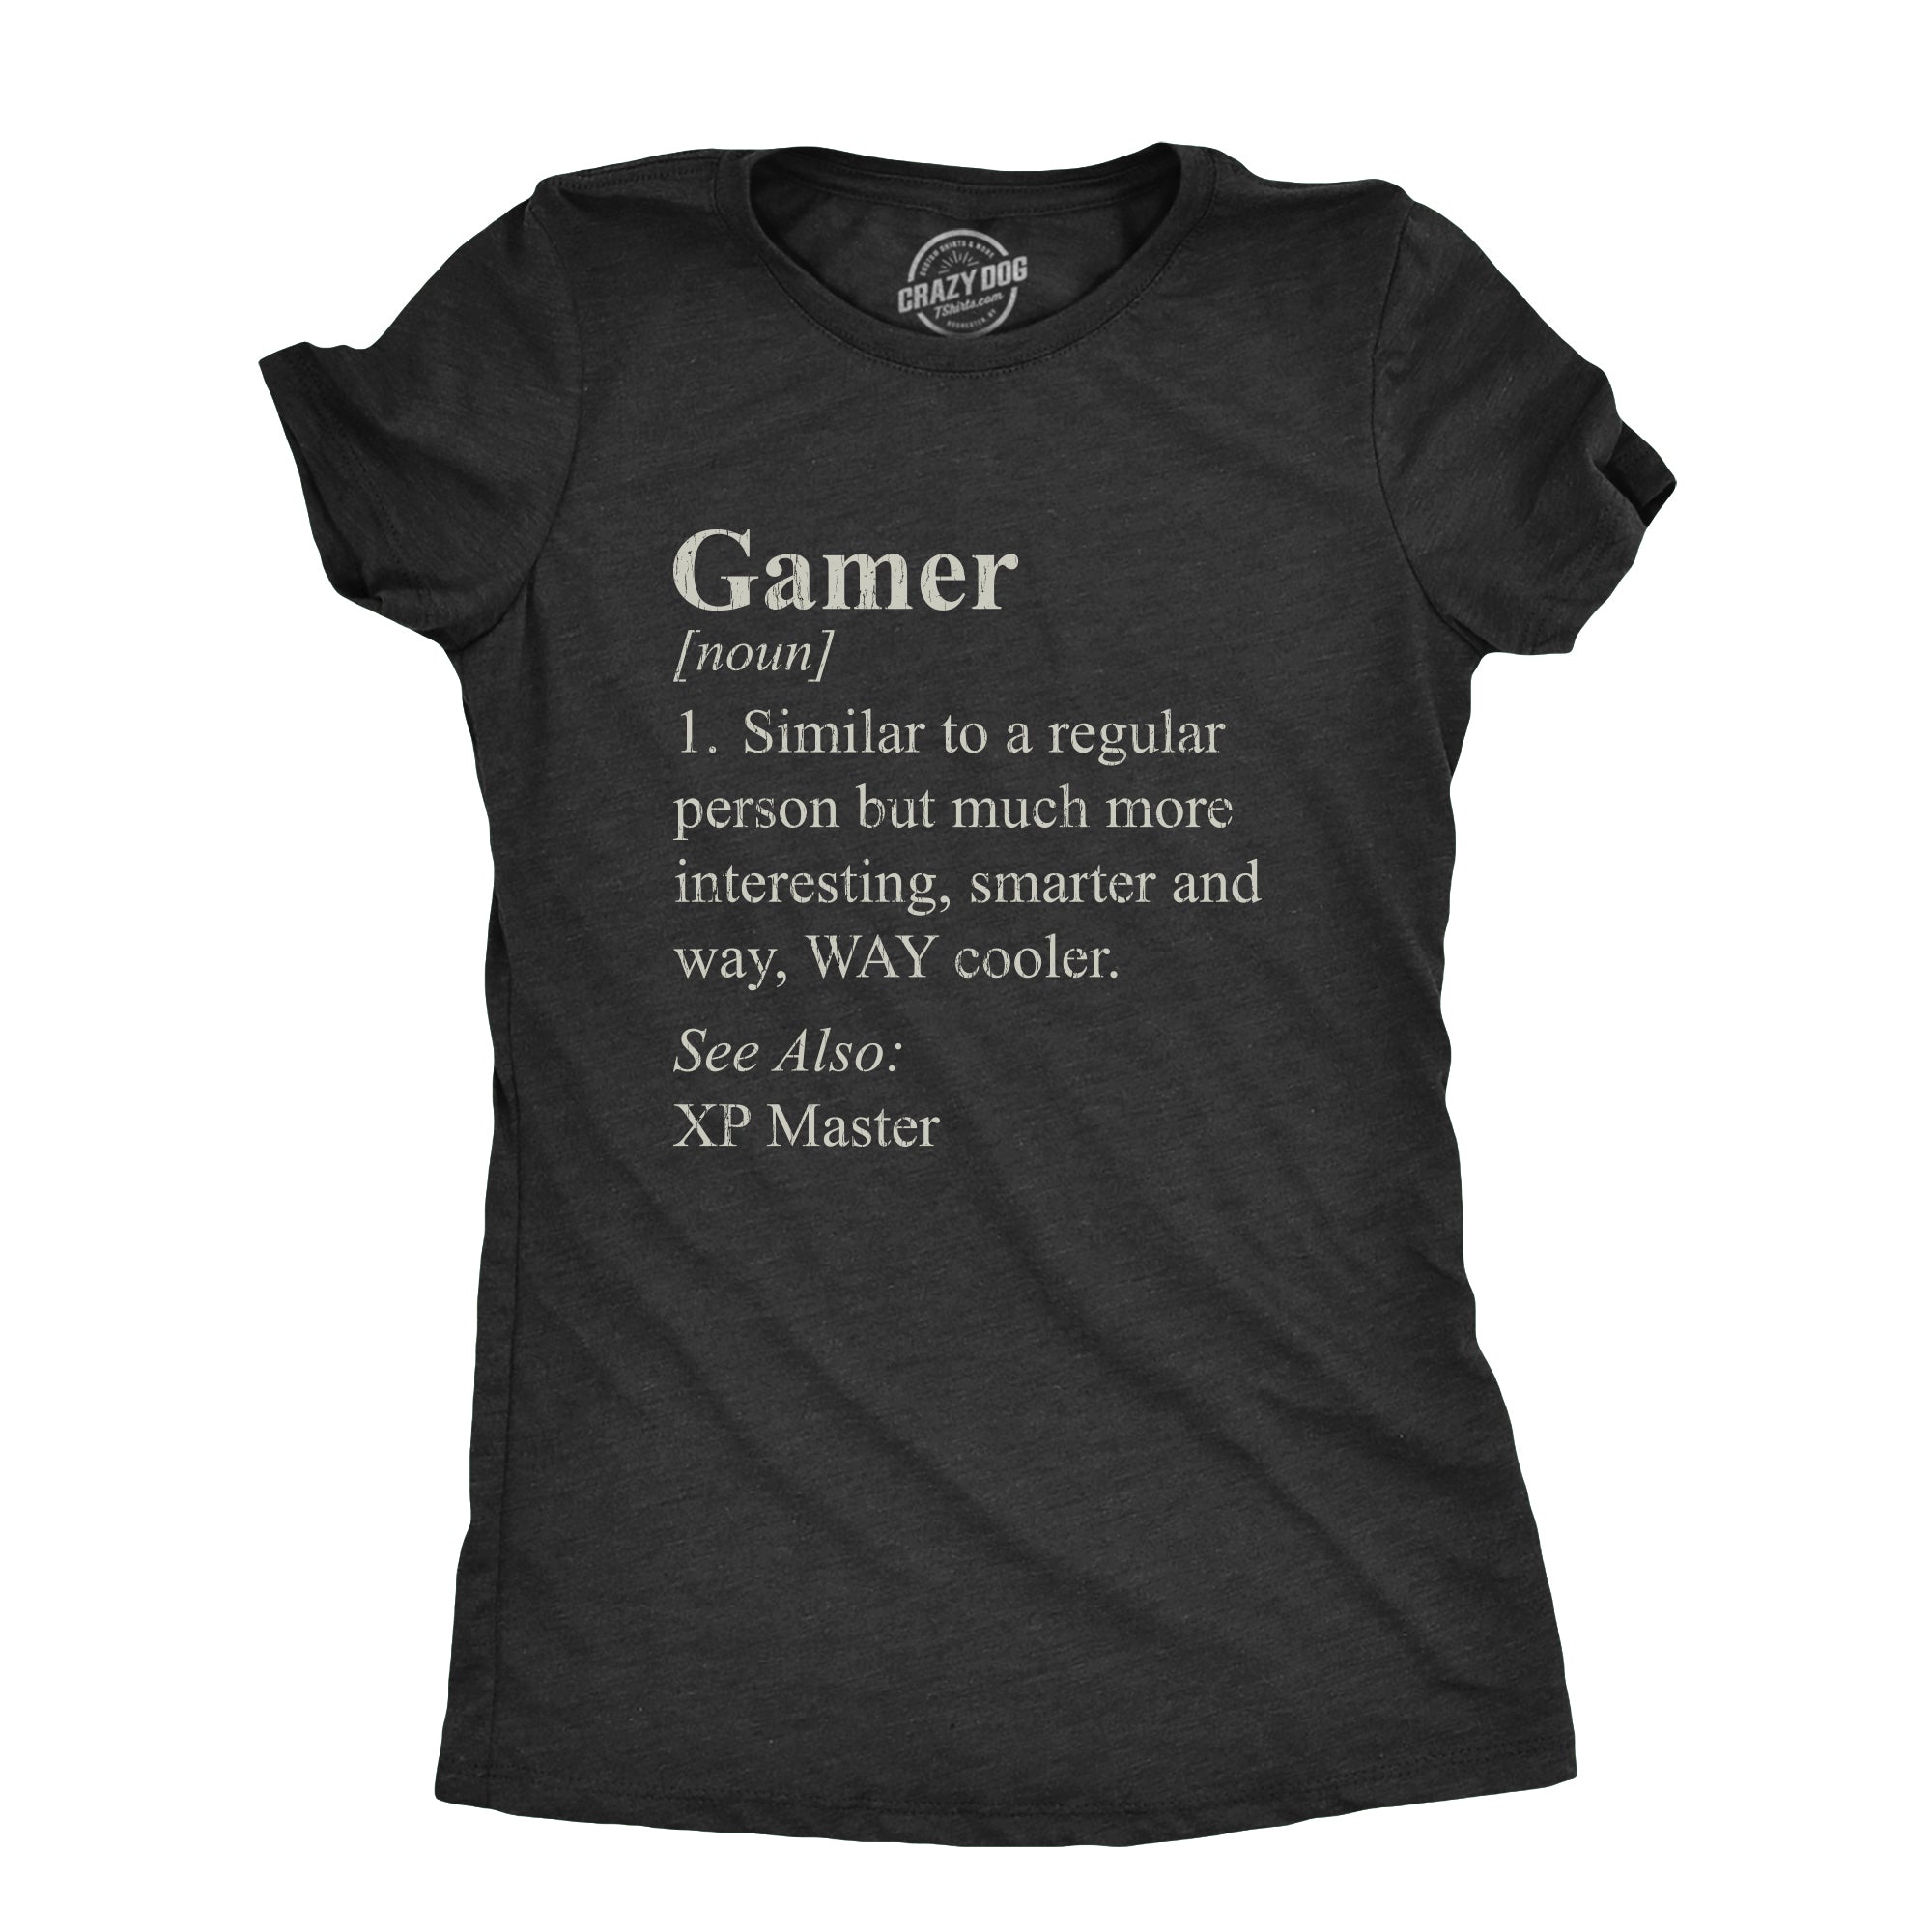 Funny Heather Black - GAMER Gamer Definition Womens T Shirt Nerdy Video Games Sarcastic Tee